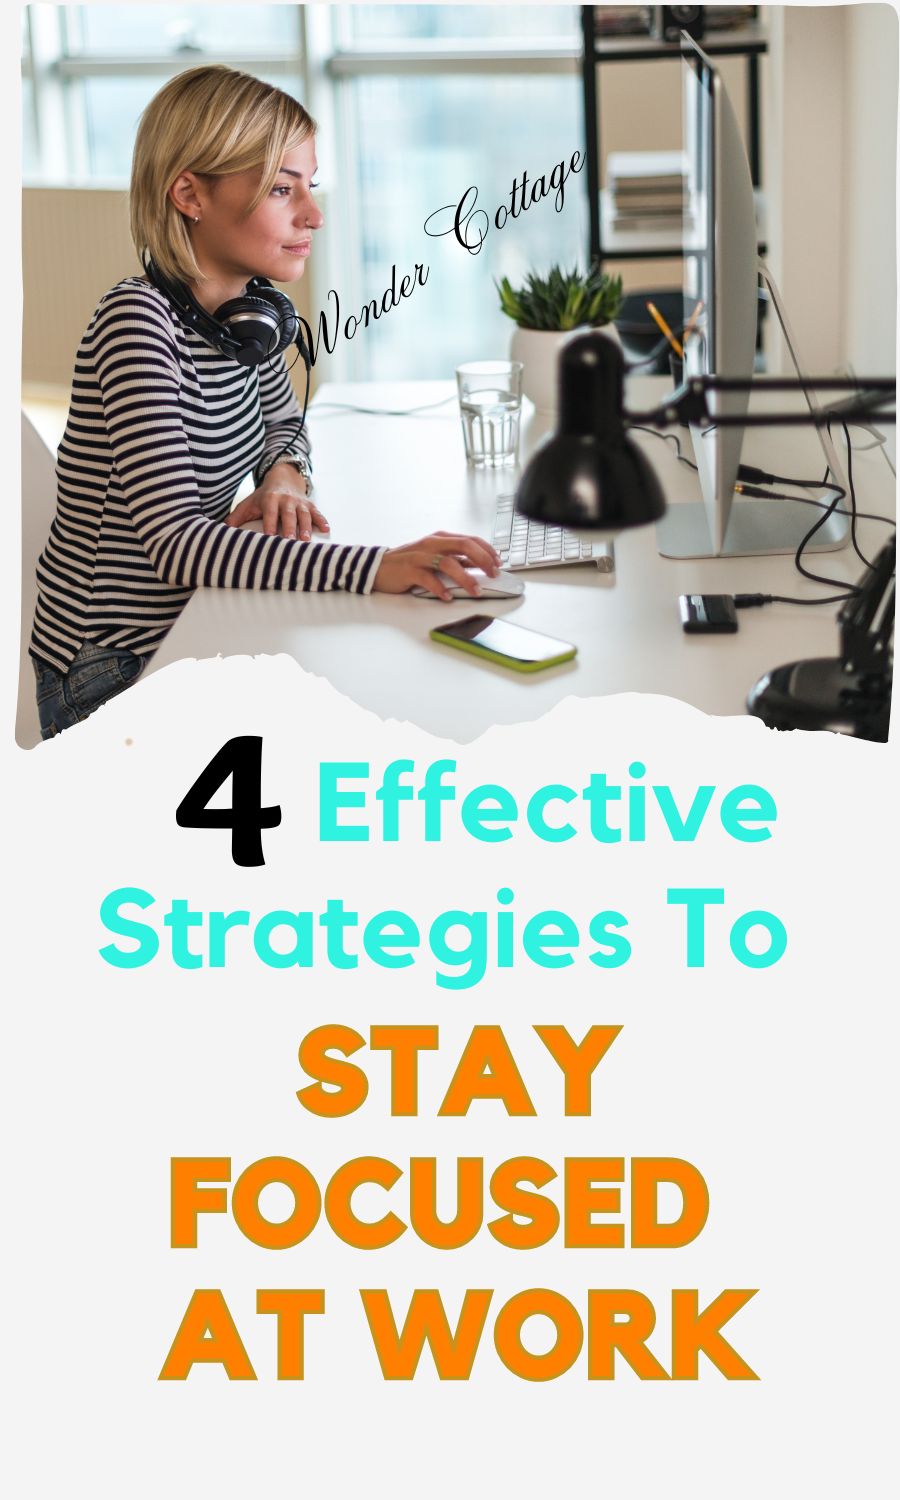 Effective Strategies for Staying Focused at Work